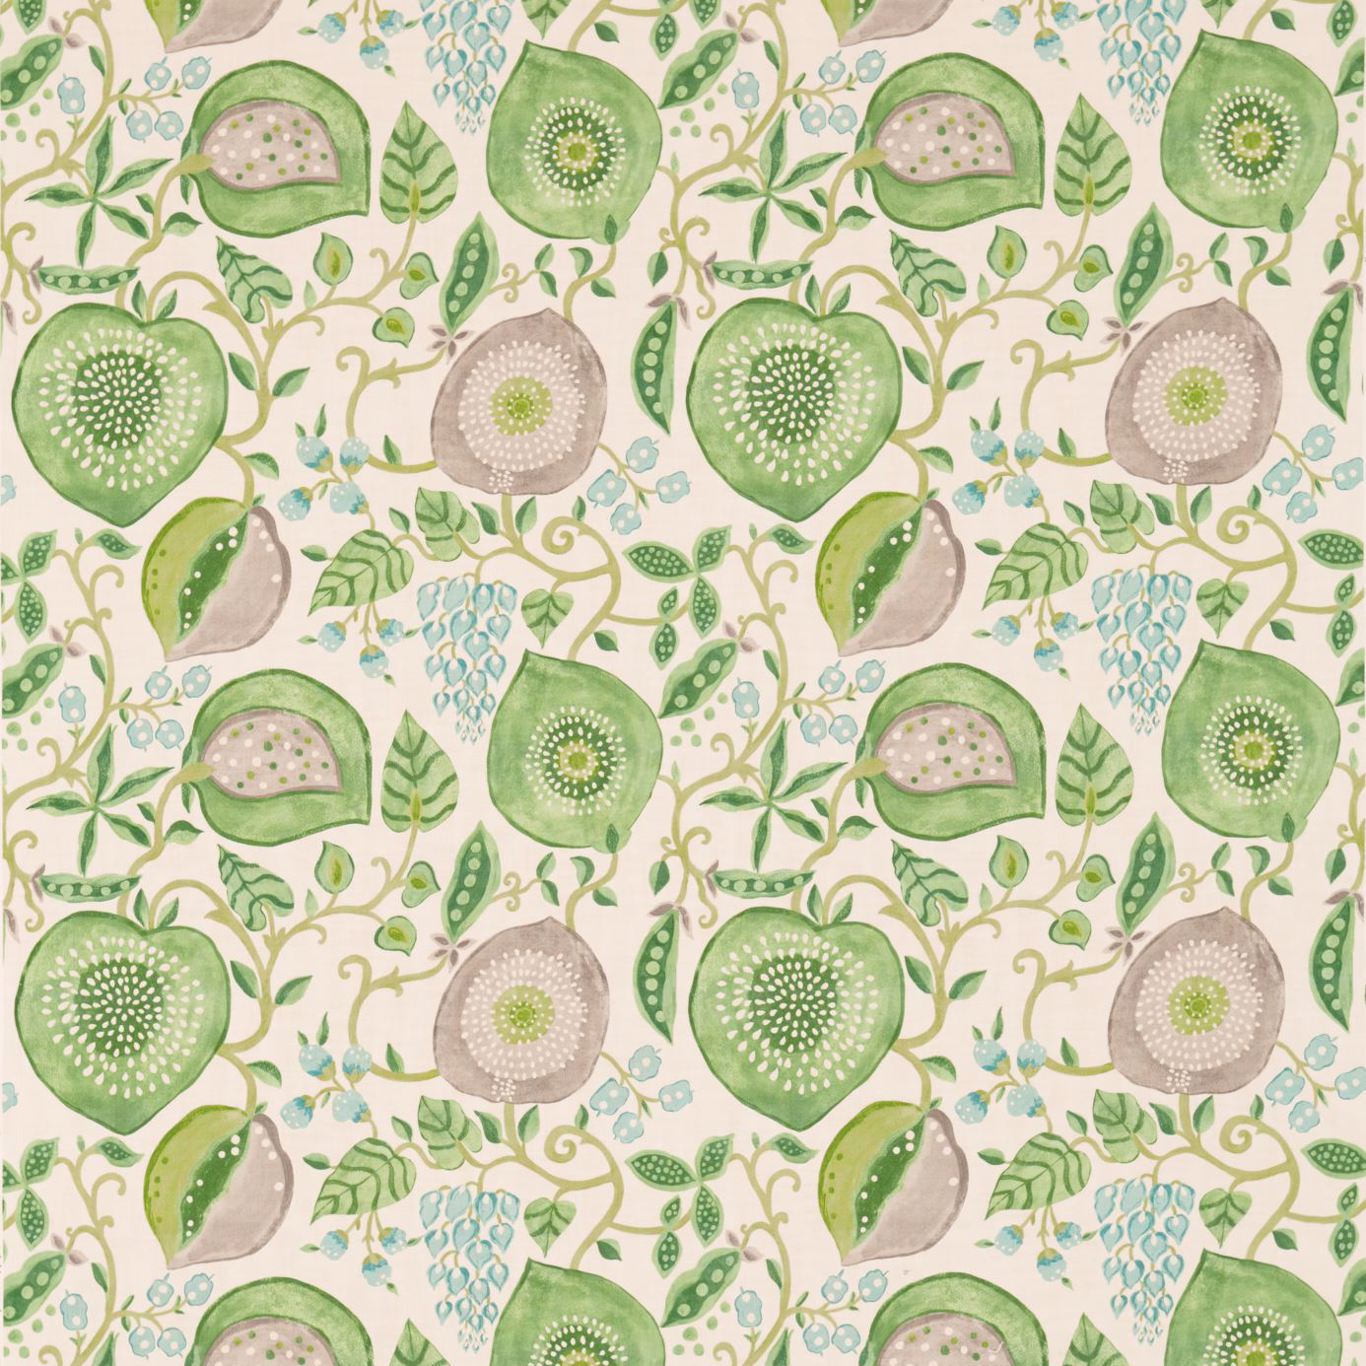 Peas & Pods Leaf Green/Ivory Fabric by SAN